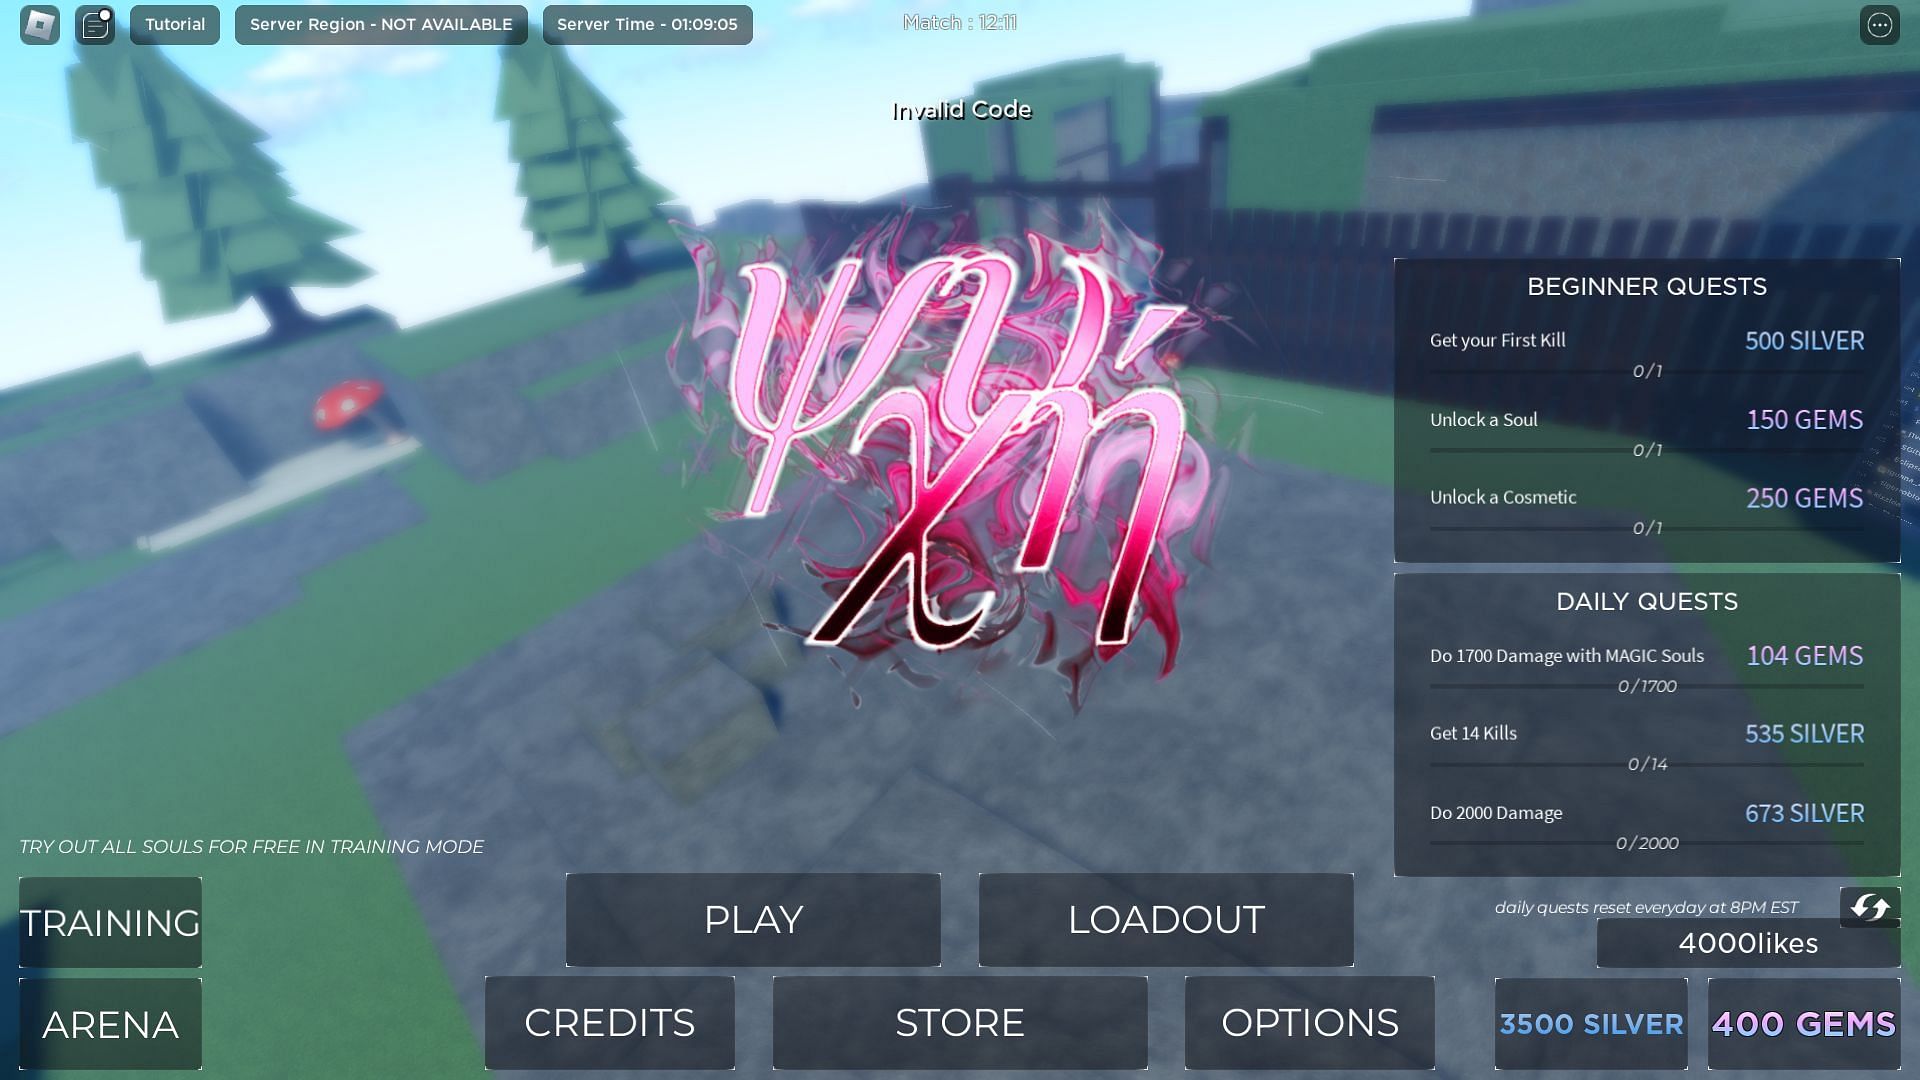 Troubleshooting codes for Psychis Battleground (Image via Roblox)